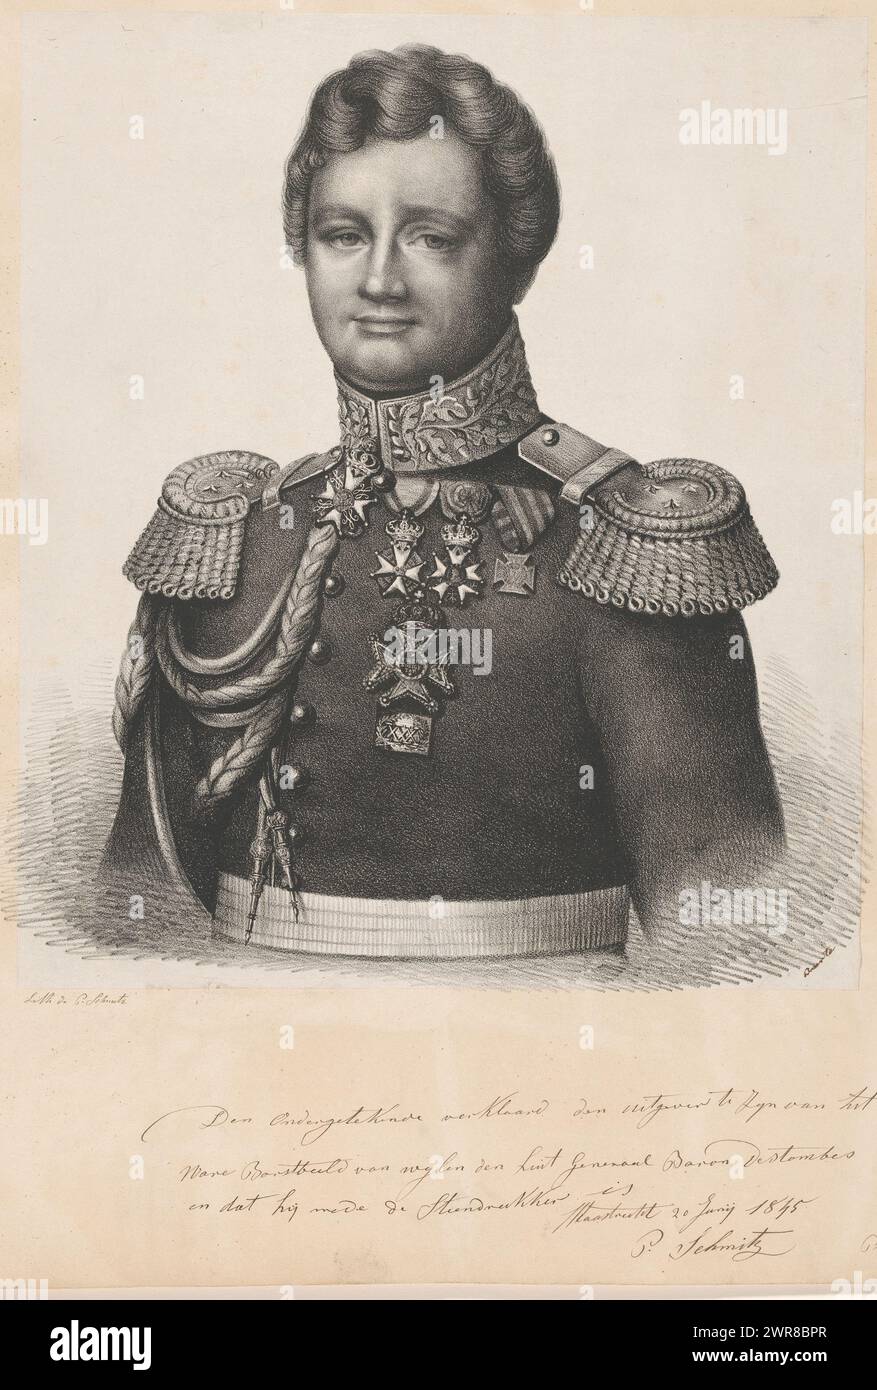 Portrait of Andries Jan Jacob des Tombe, The sitter wears a military uniform with order insignia., print maker: anonymous, printer: G. Schmitz, publisher: G. Schmitz, Maastricht, 1845, paper, height 550 mm × width 430 mm, print Stock Photo